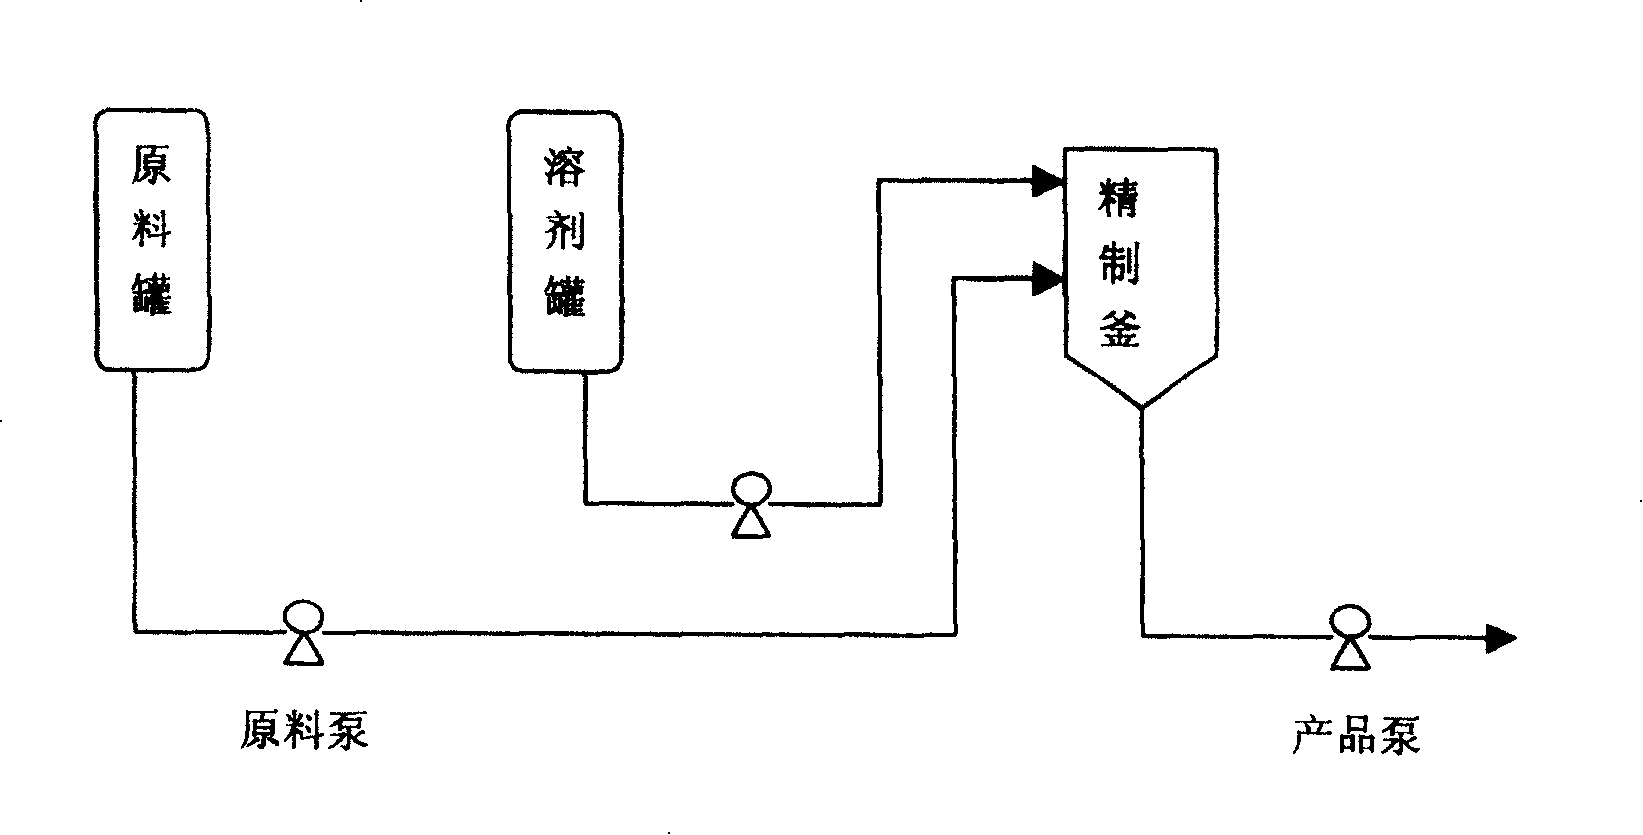 Method for refining poor diesel oil by using compound solvent